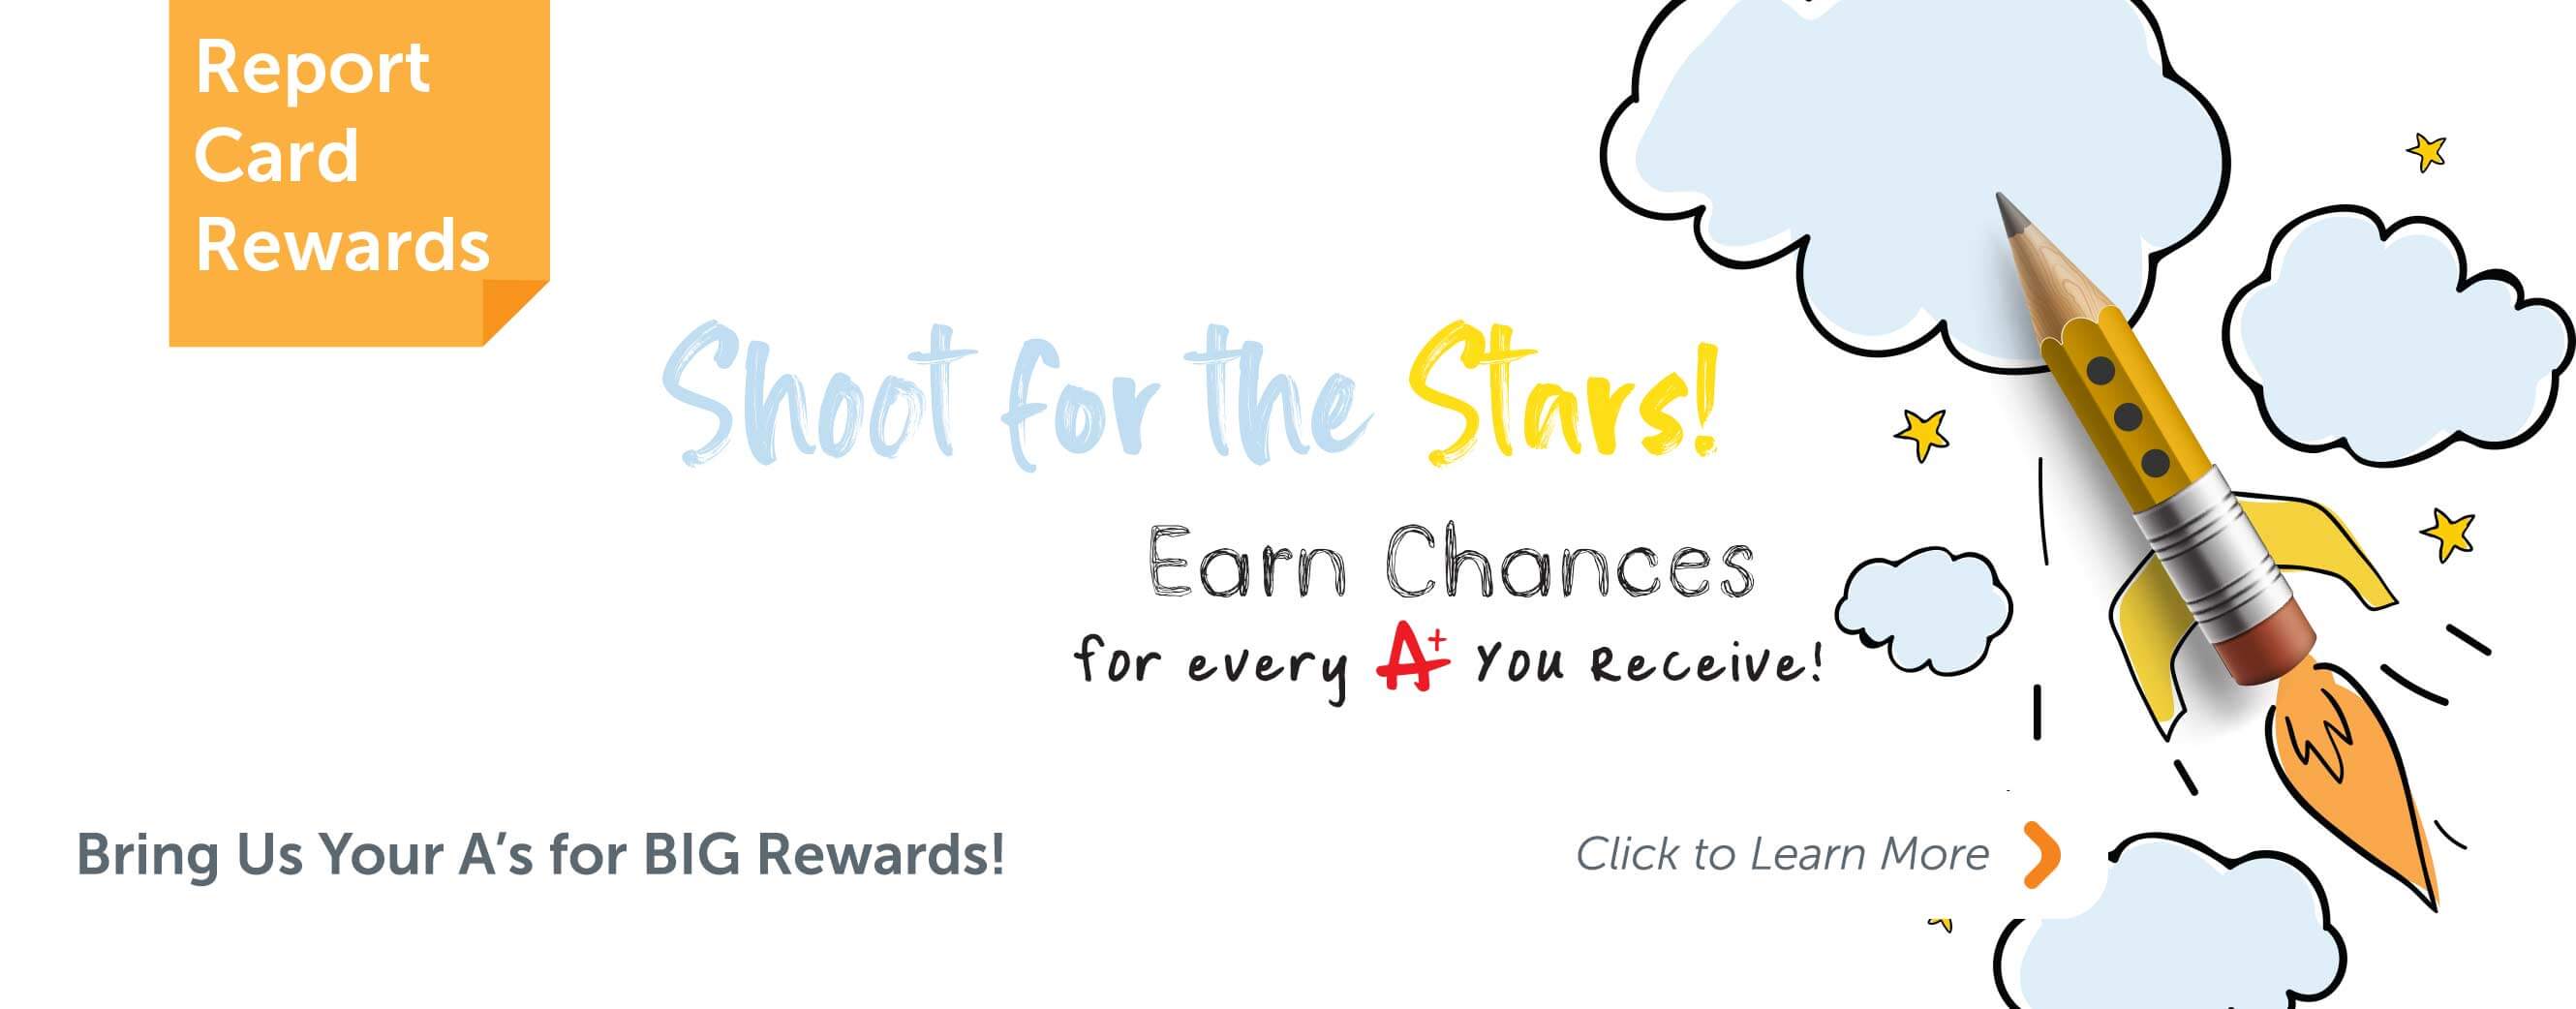 Bring us your A's for Big Rewards! Click to learn more.